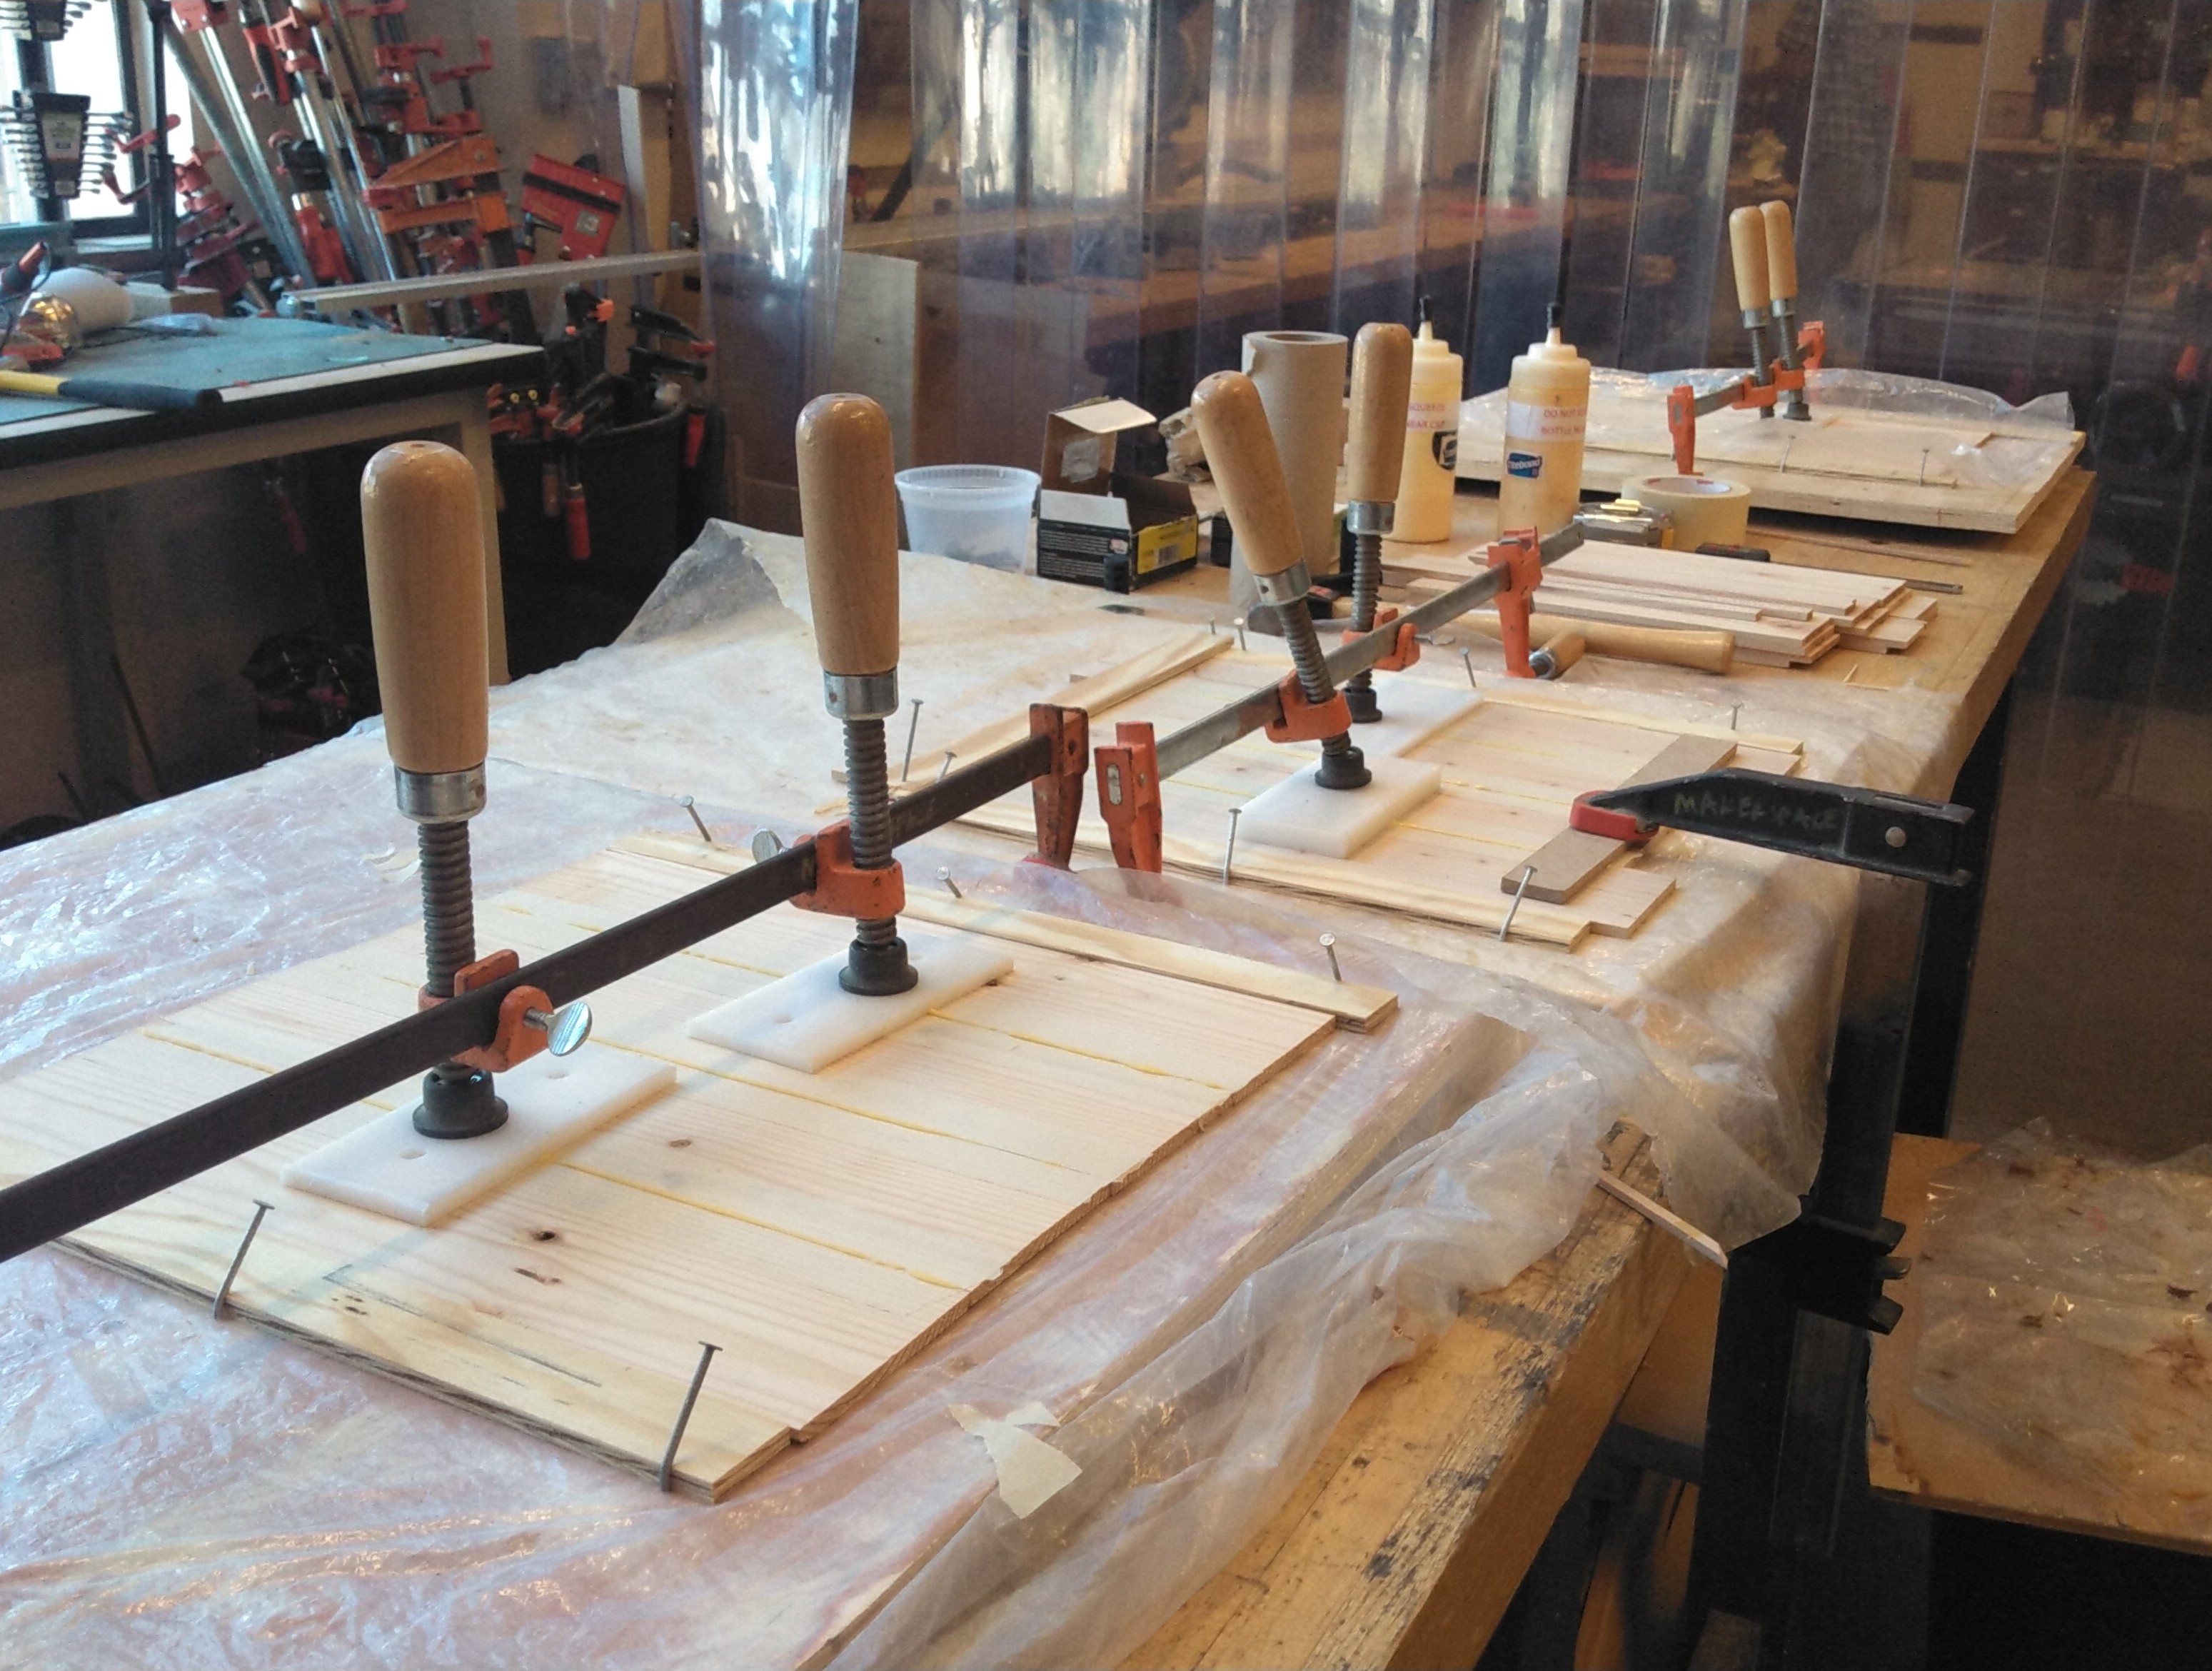 panels of wood being glued up